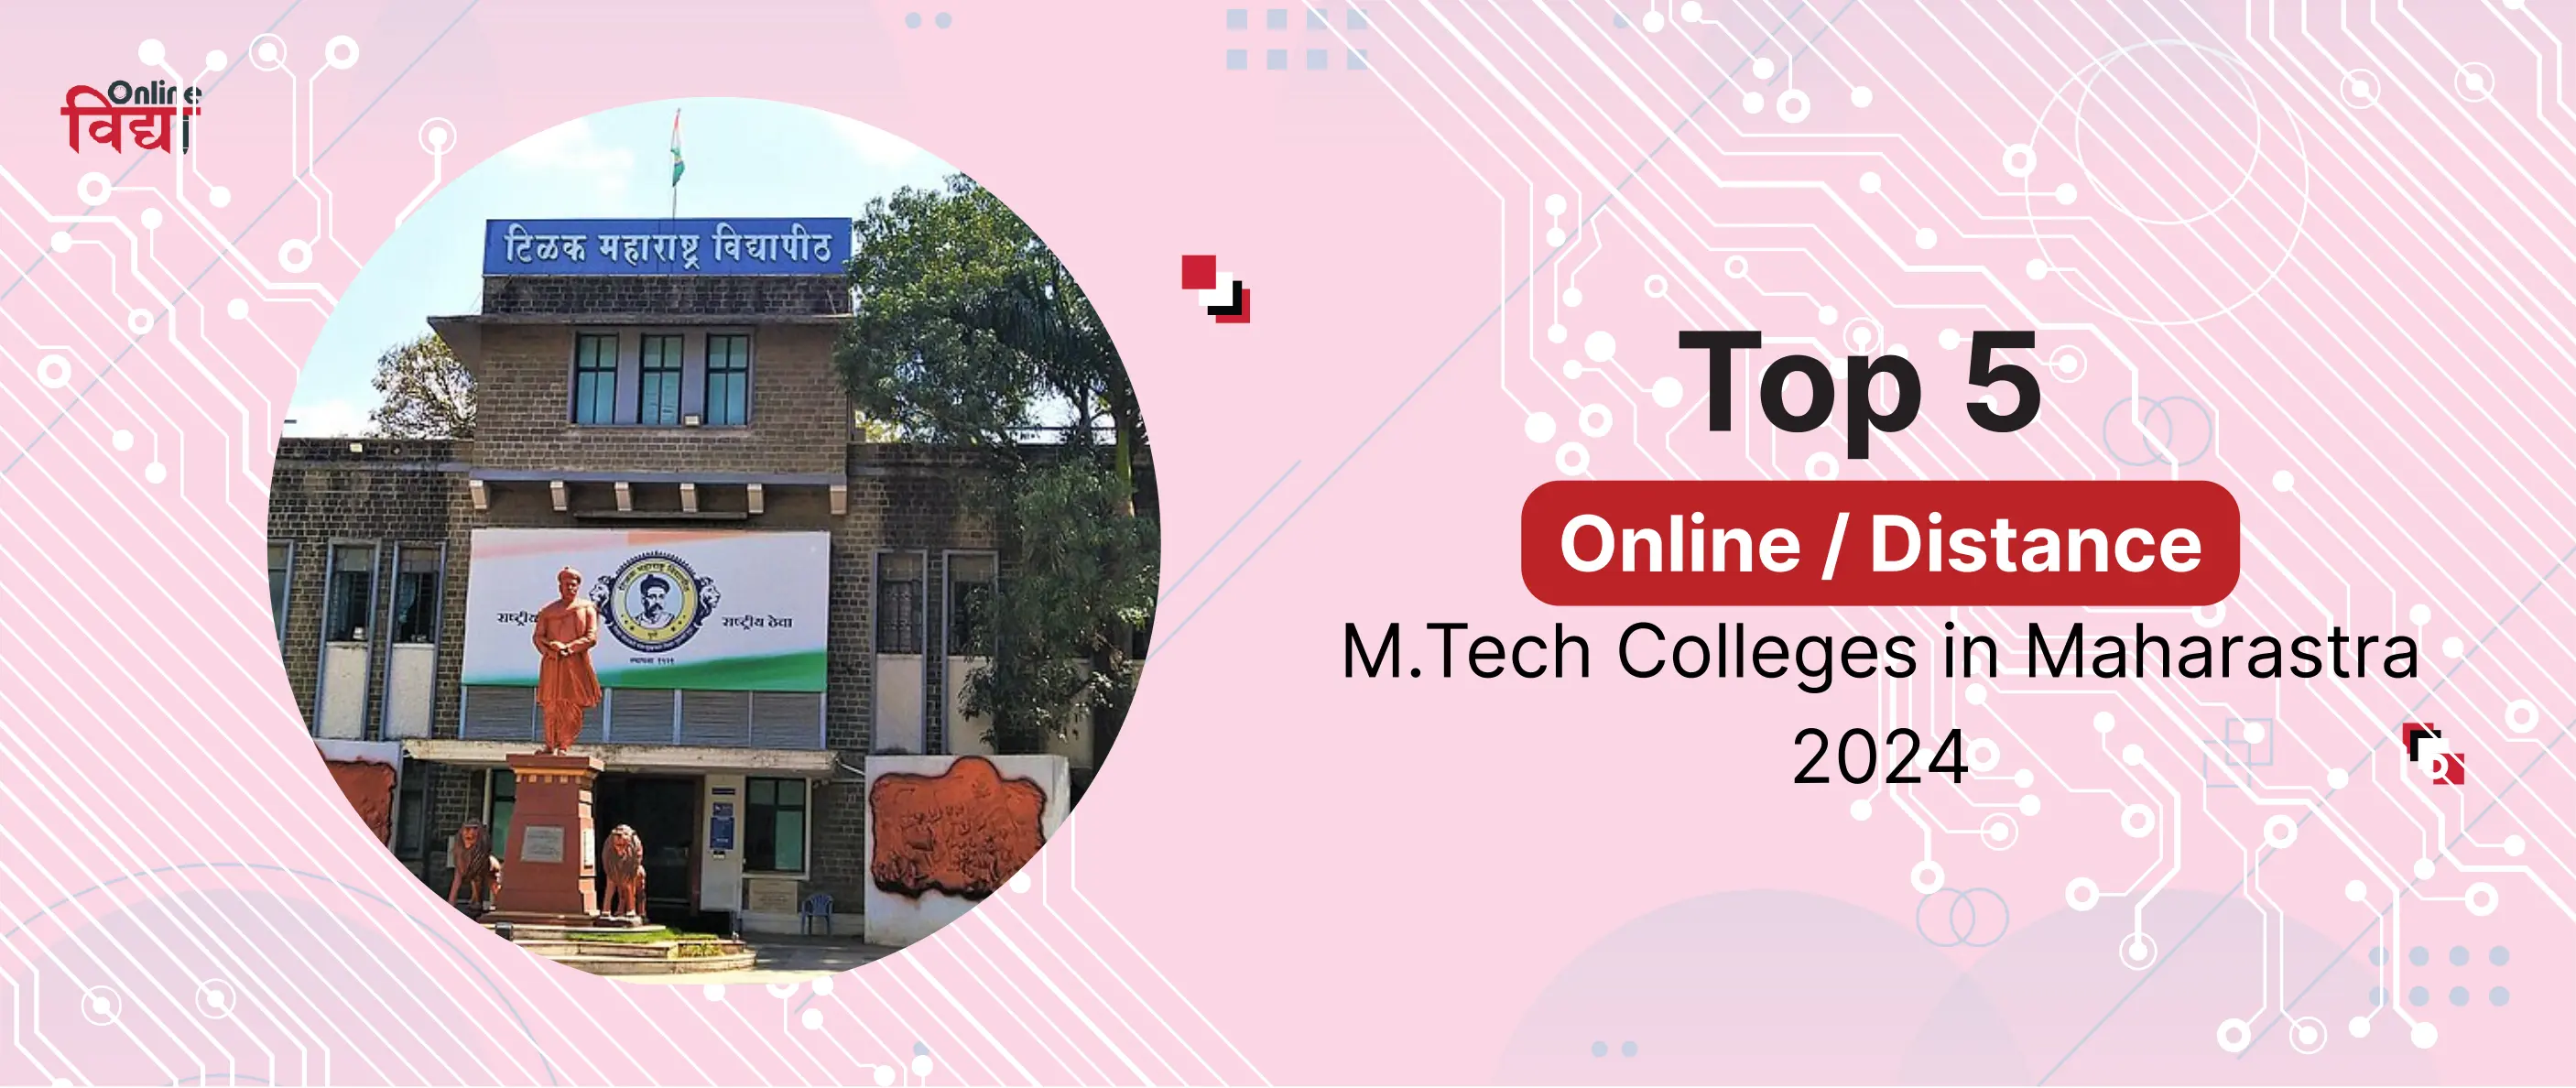 Top 5 Online/ Distance MTech Colleges in Maharashtra 2024